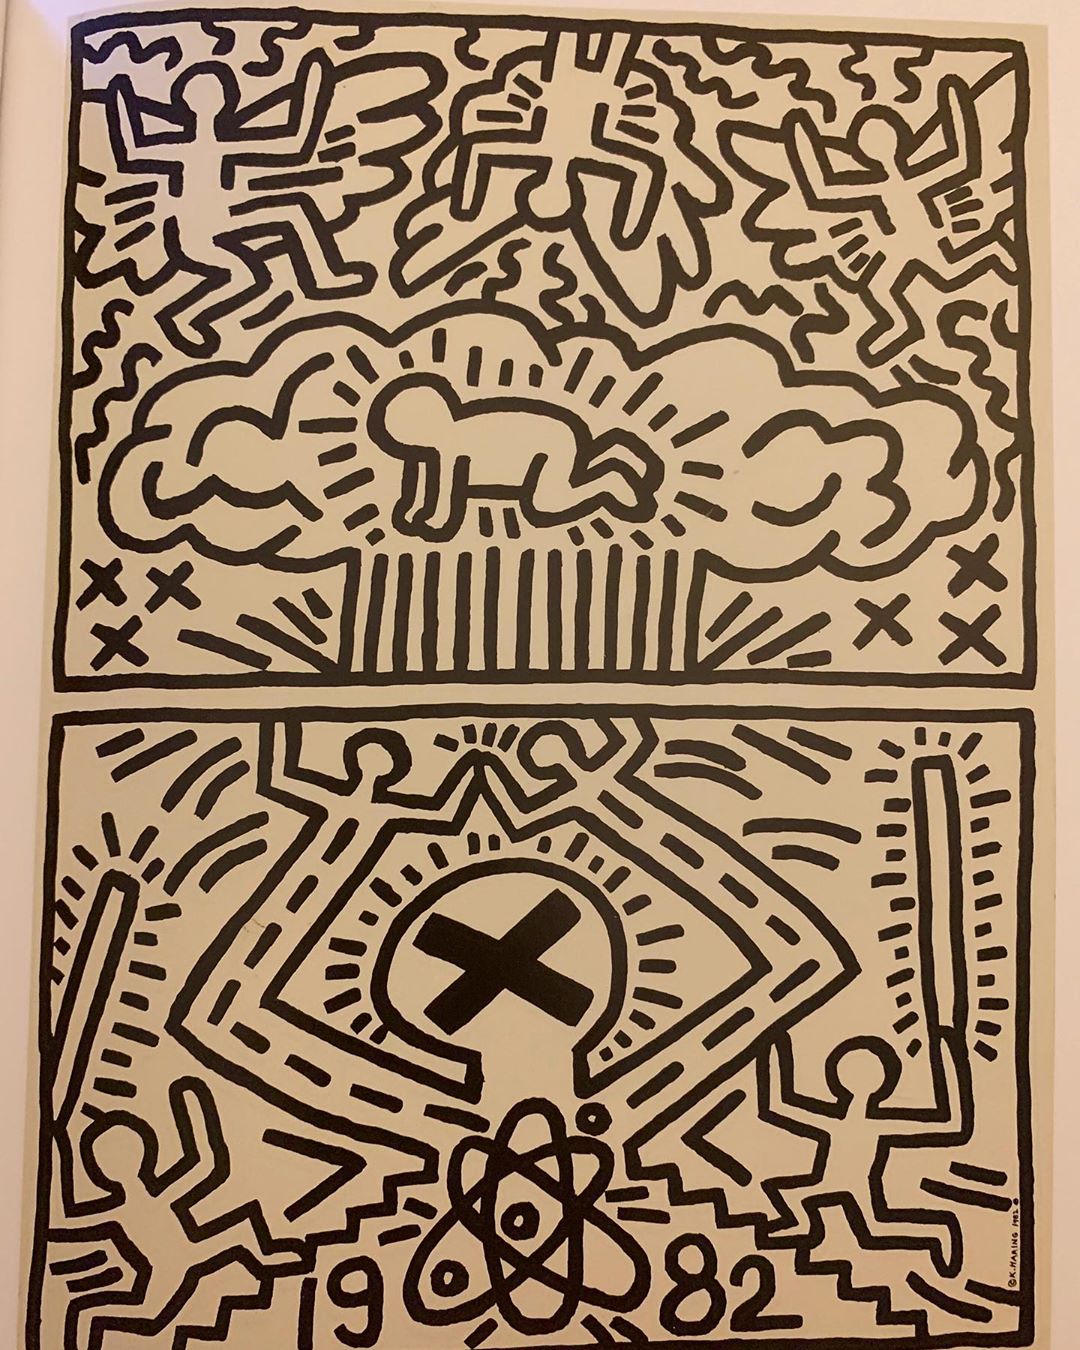 Keith Haring Anti Nuclear Rally poster 1982 B1lCM WHUAT